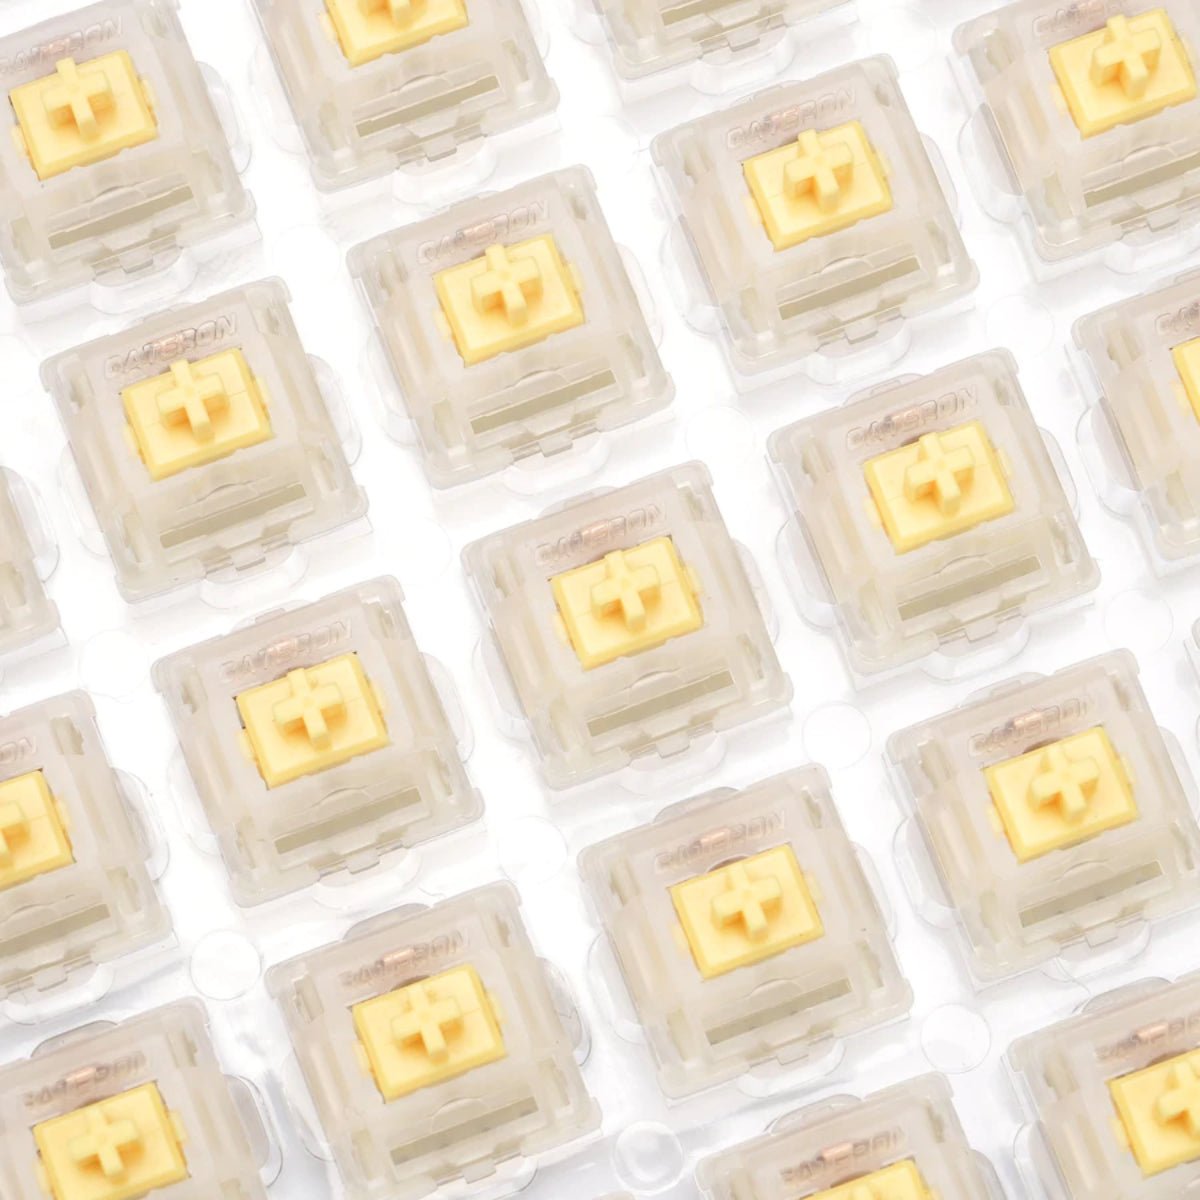 KBD Fans Gateron Linear Switches - Milky Yellow - Store 974 | ستور ٩٧٤